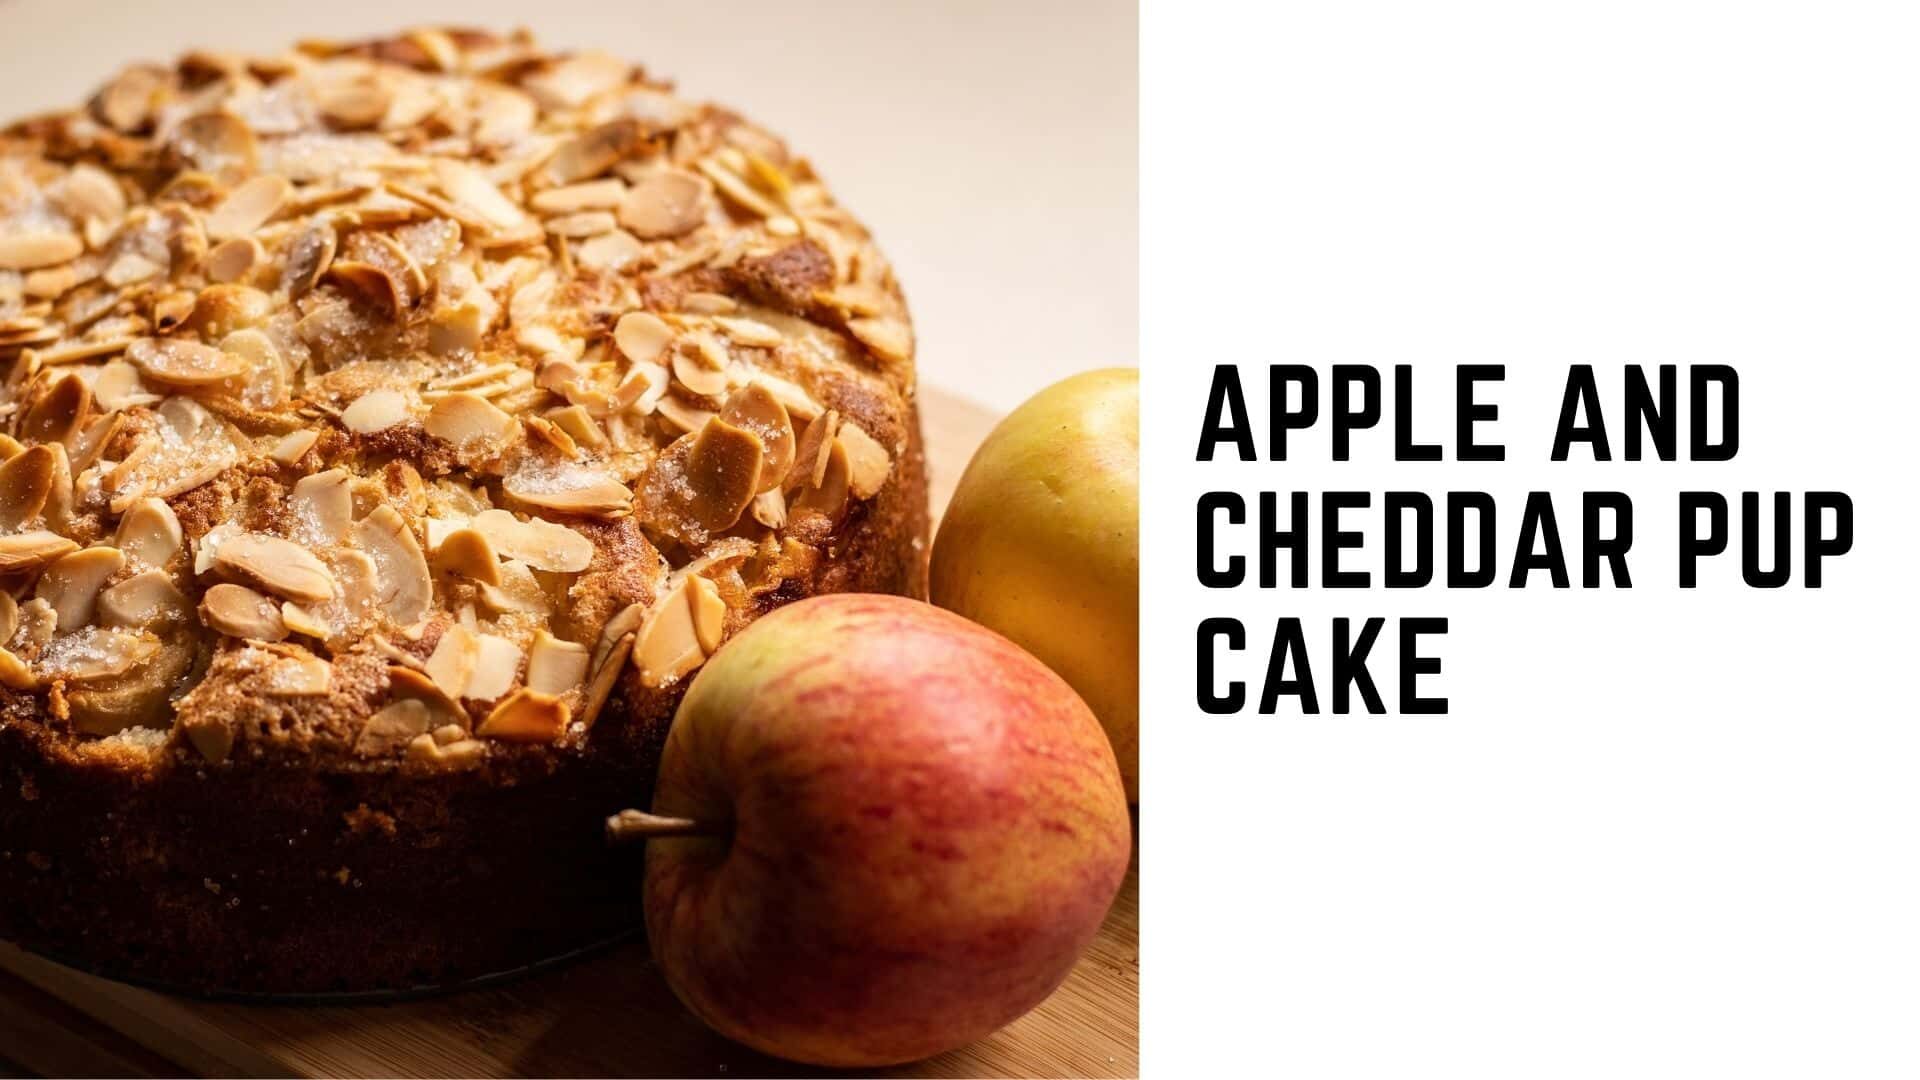 Apple and cheddar pup cake